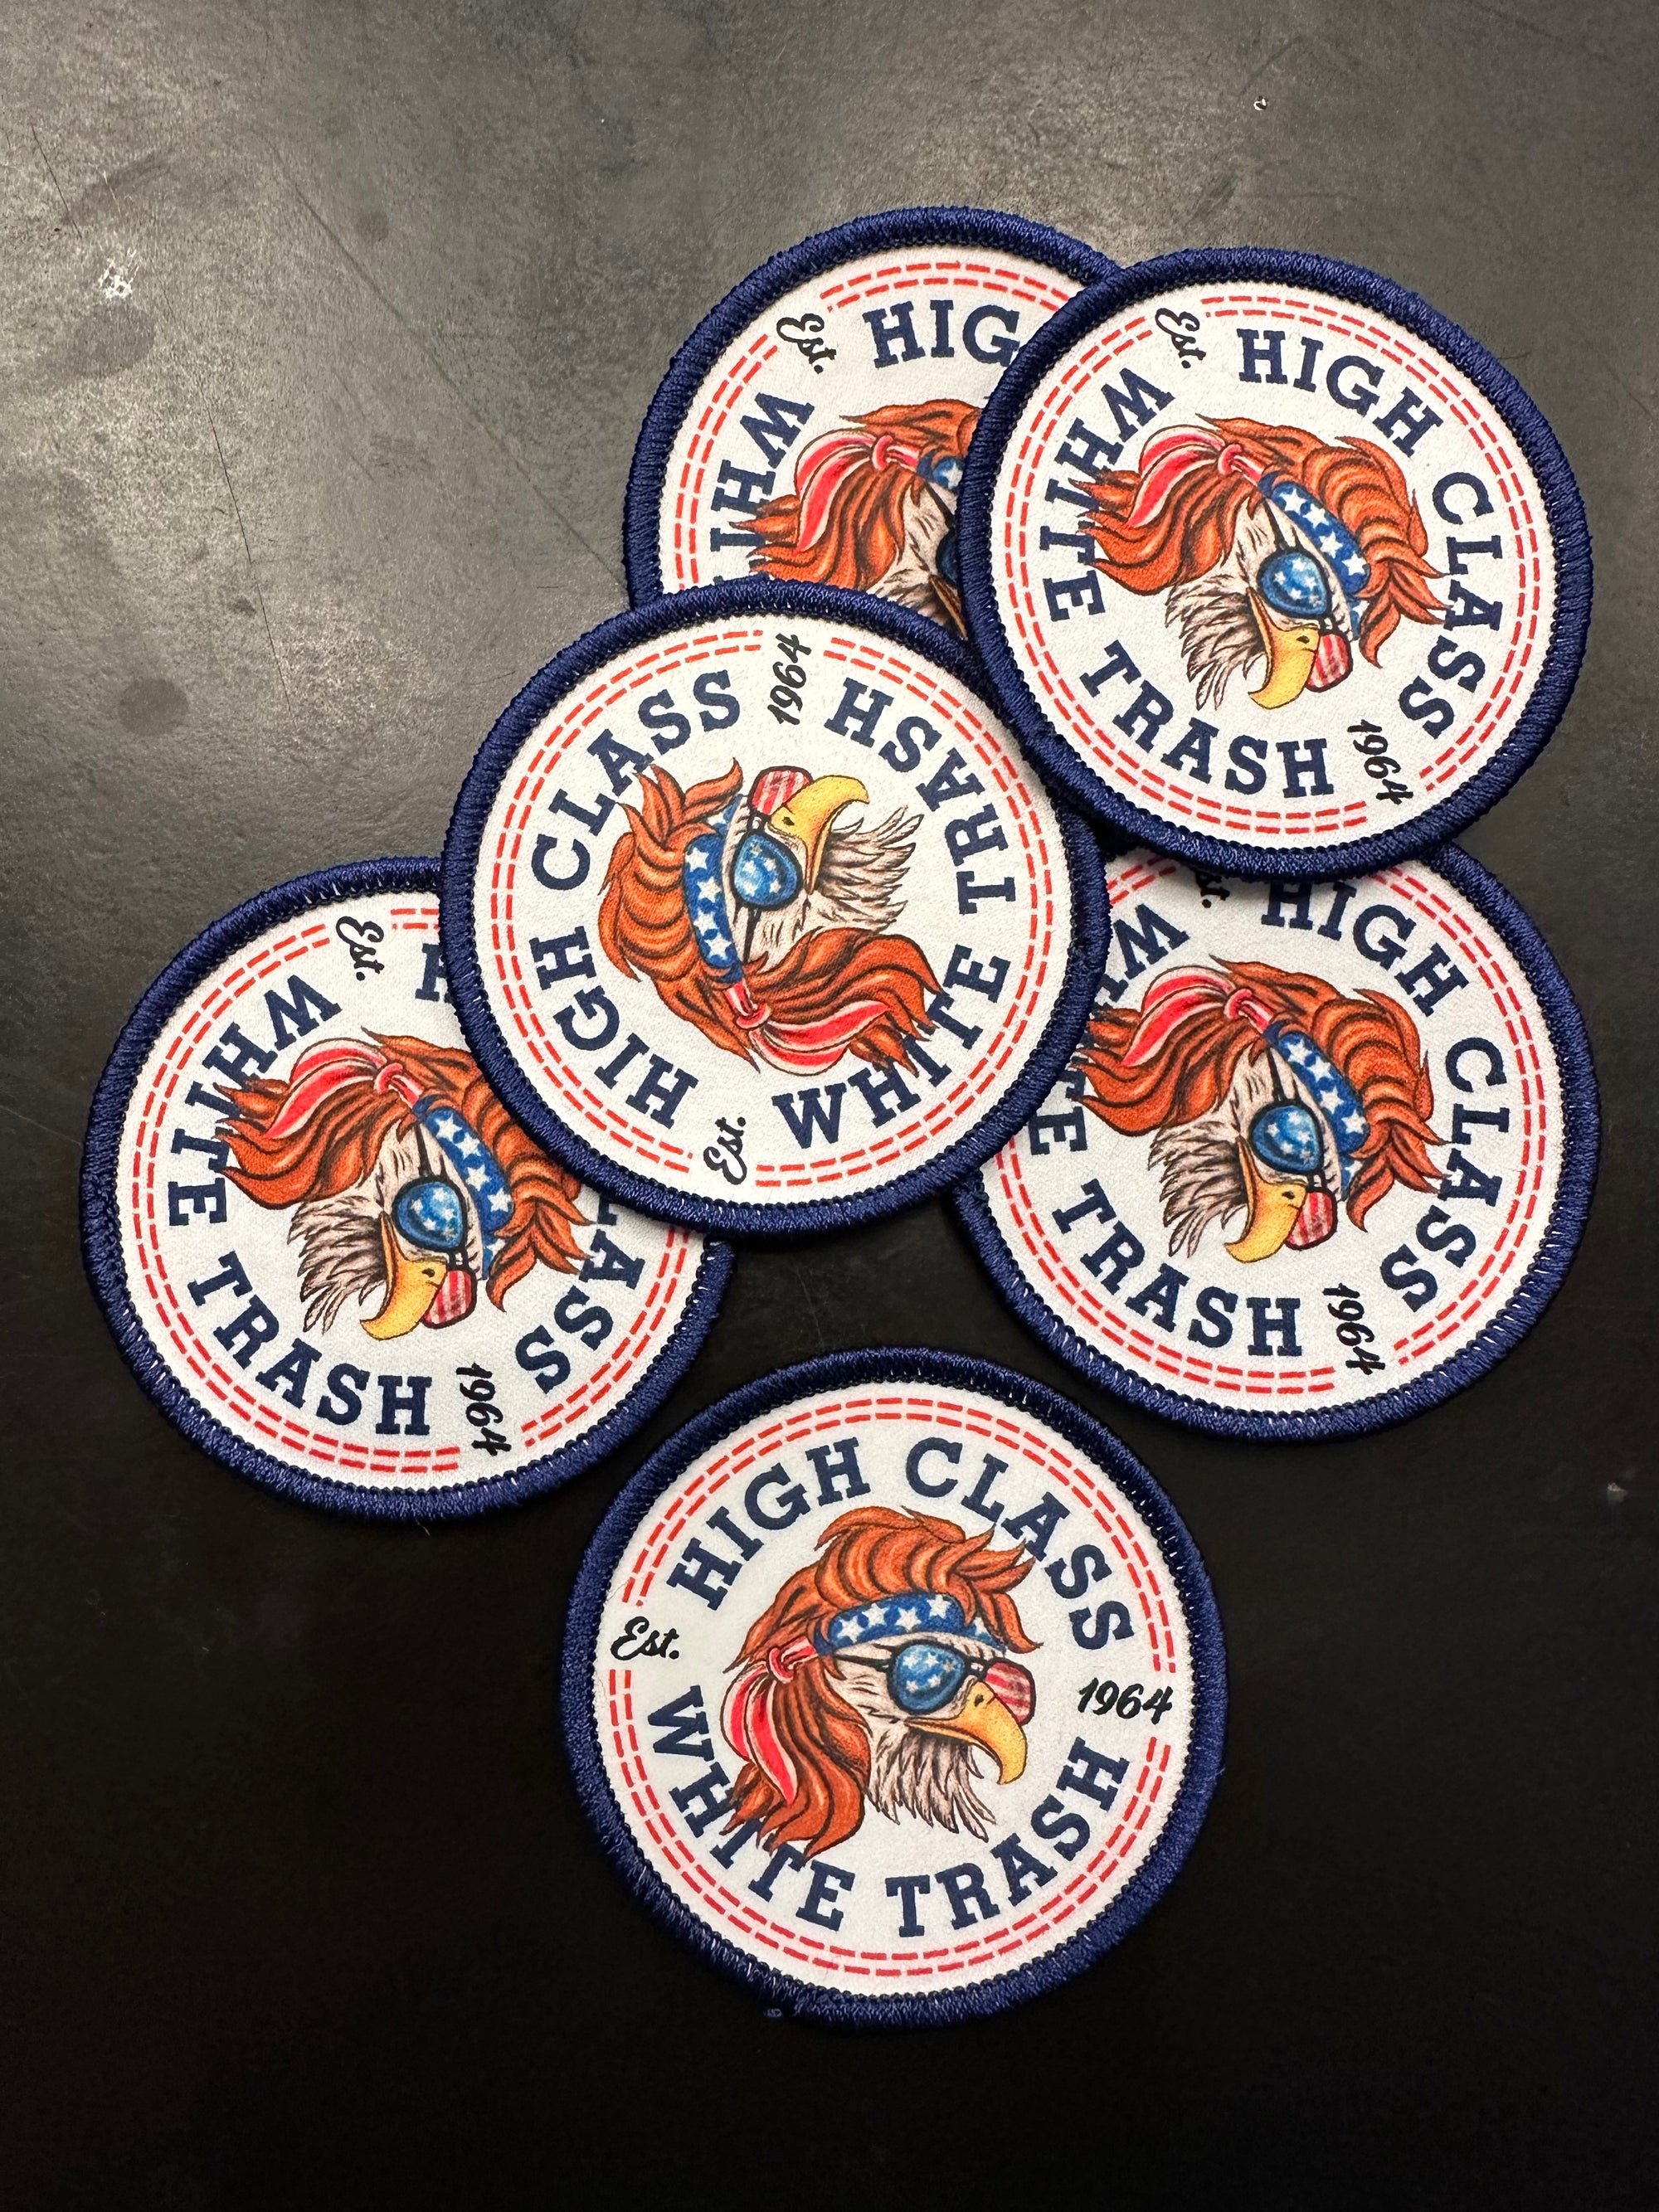 HCWT Mullet Eagle patch